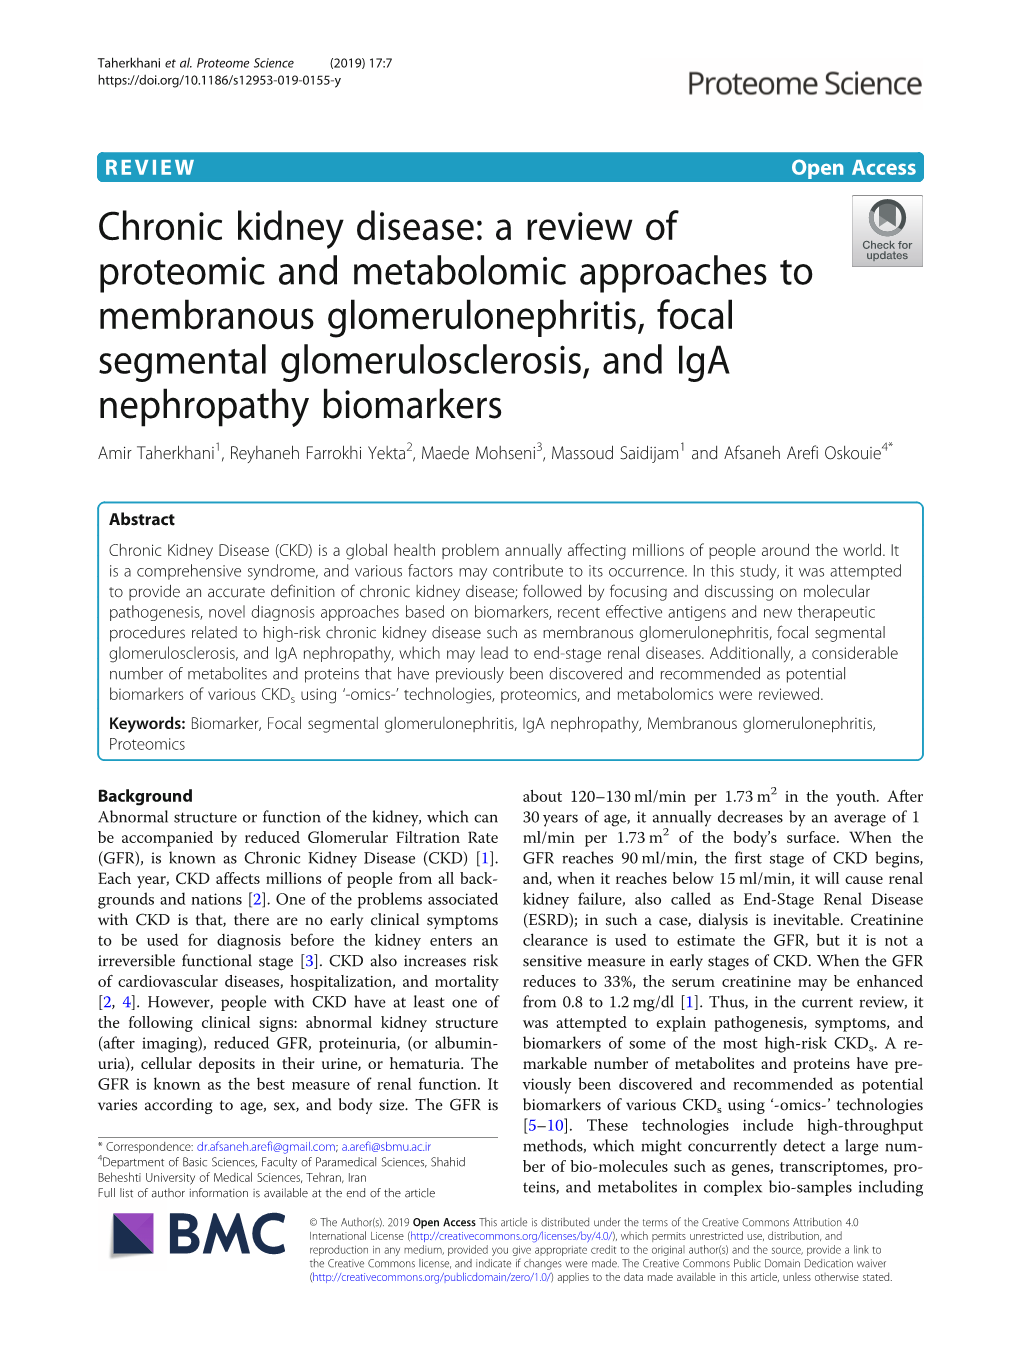 Chronic Kidney Disease: a Review of Proteomic and Metabolomic